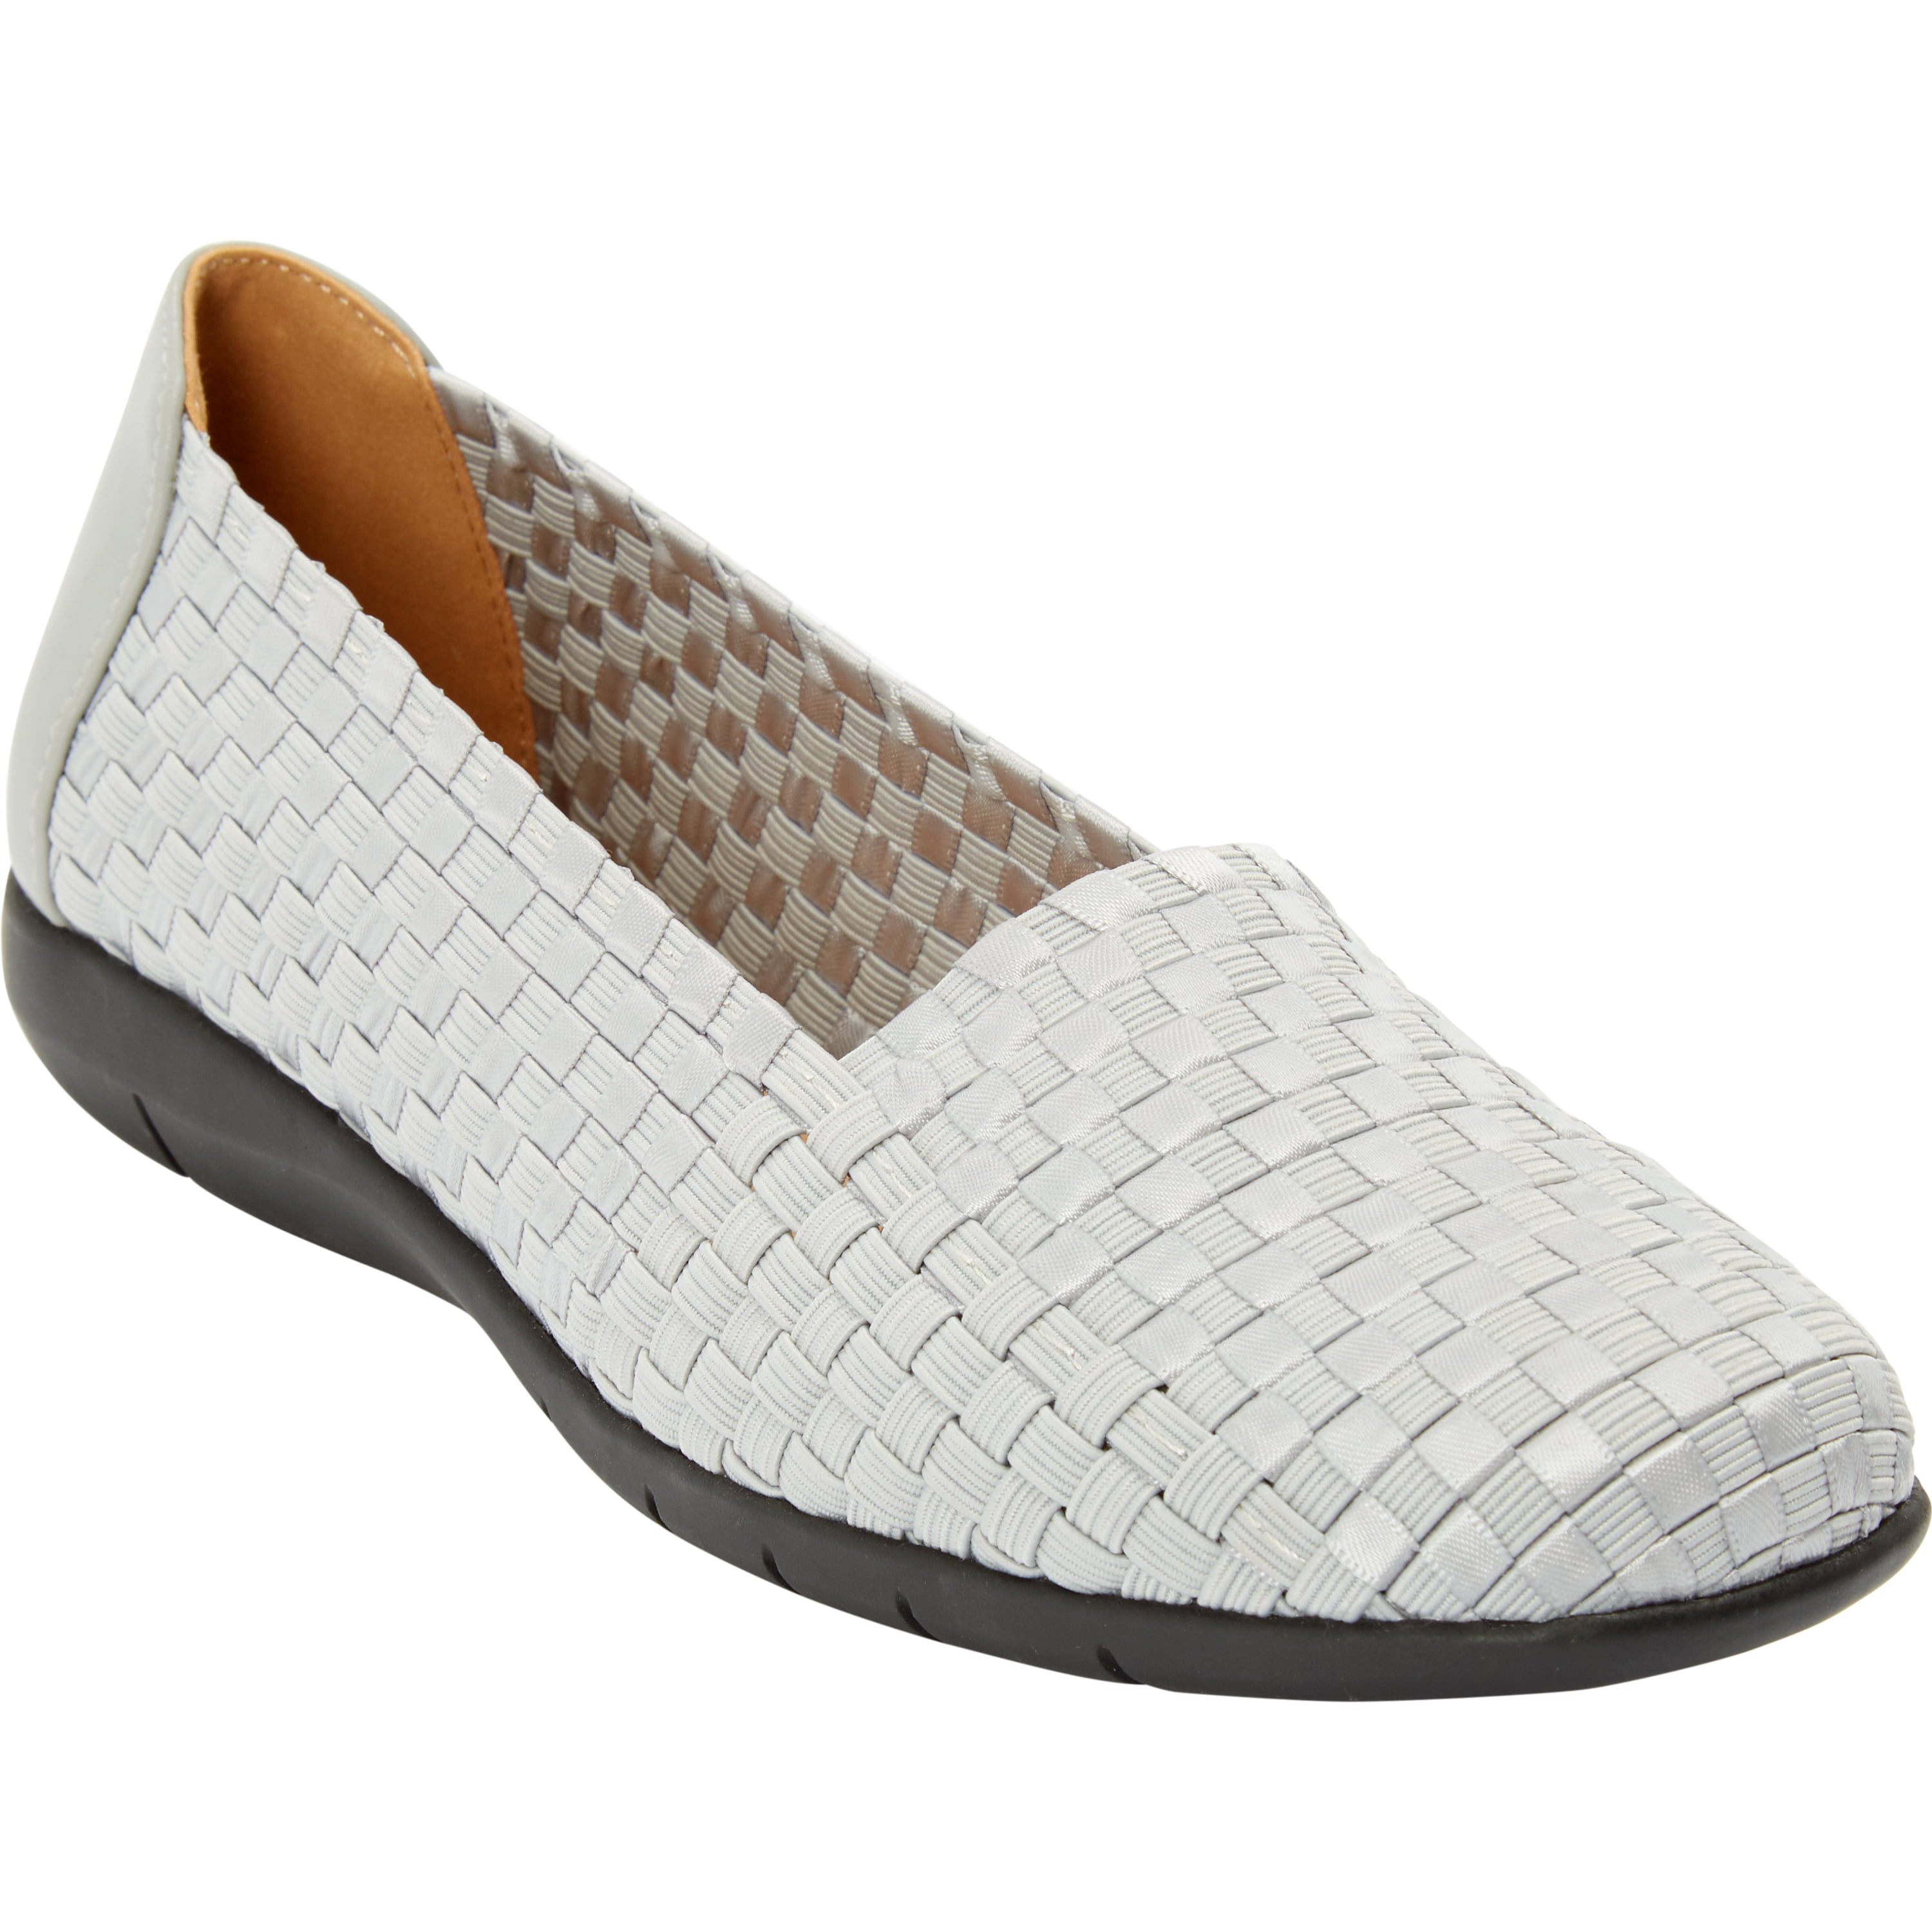 Comfortview - Comfortview Women's Wide Width The Bethany Flat Shoes ...